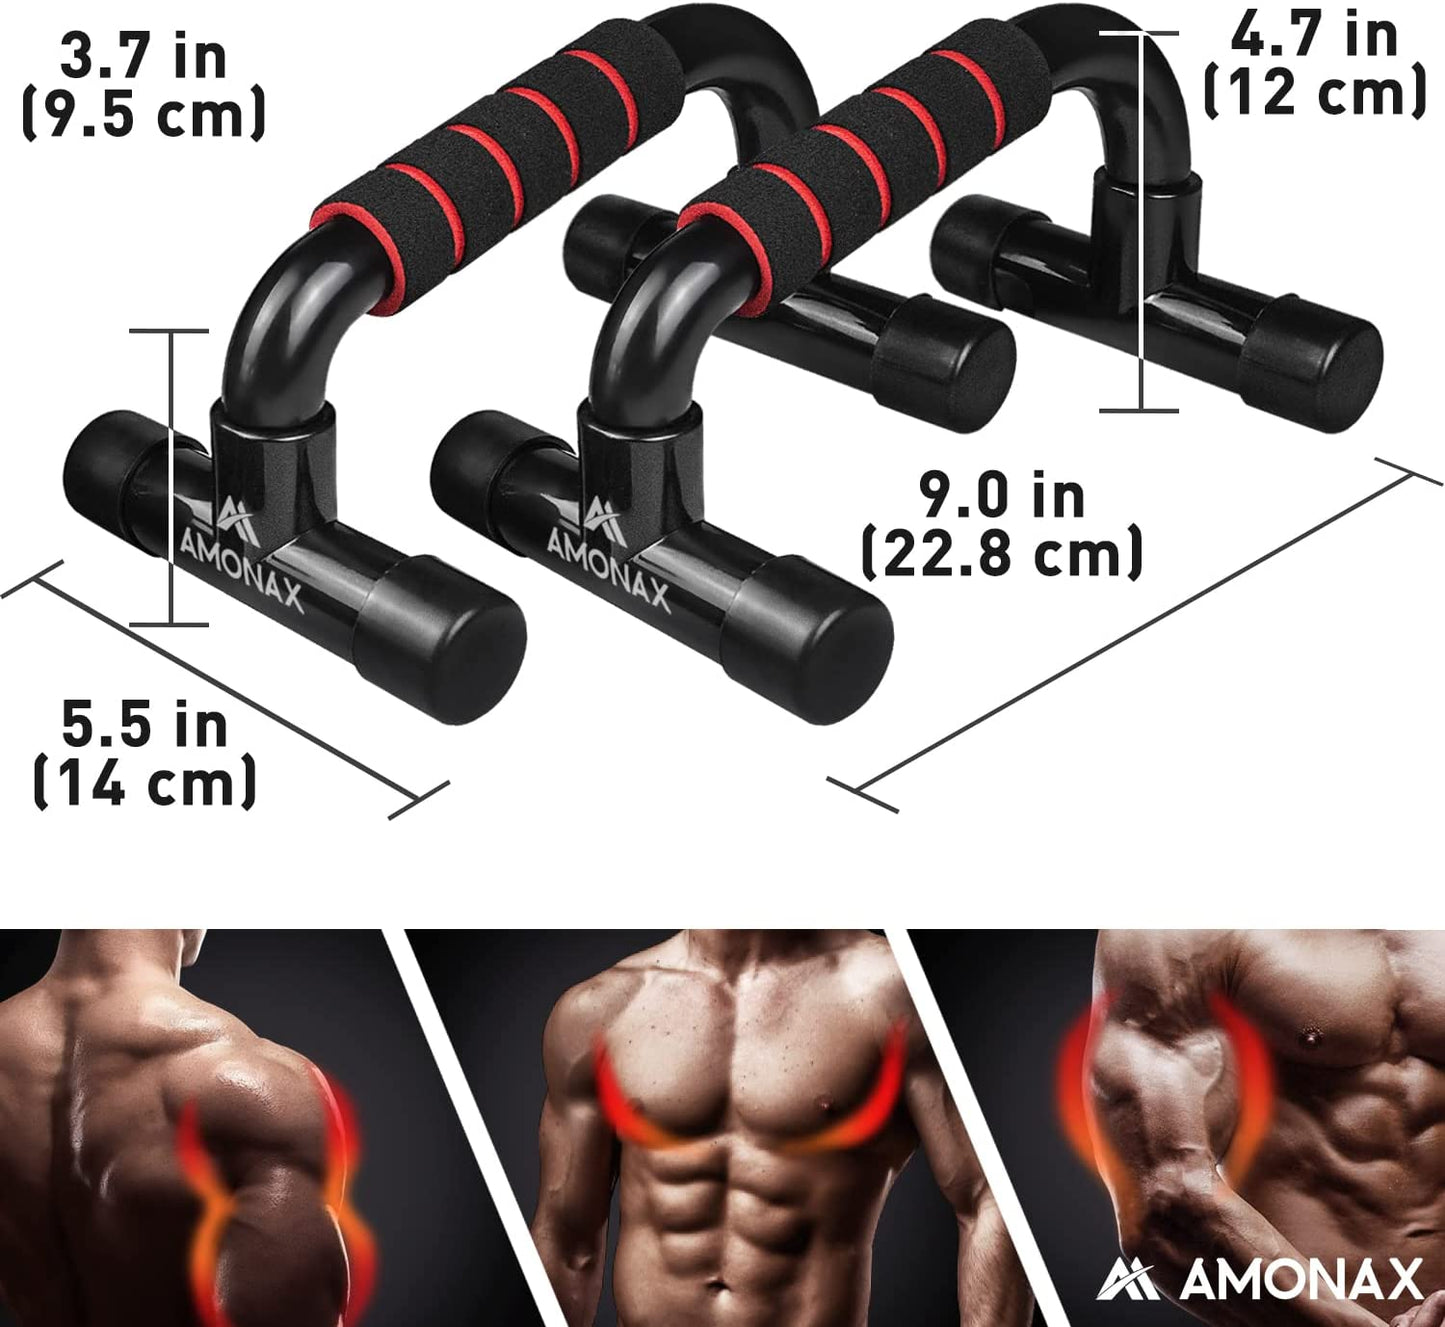 Gym Equipment for Home Workout